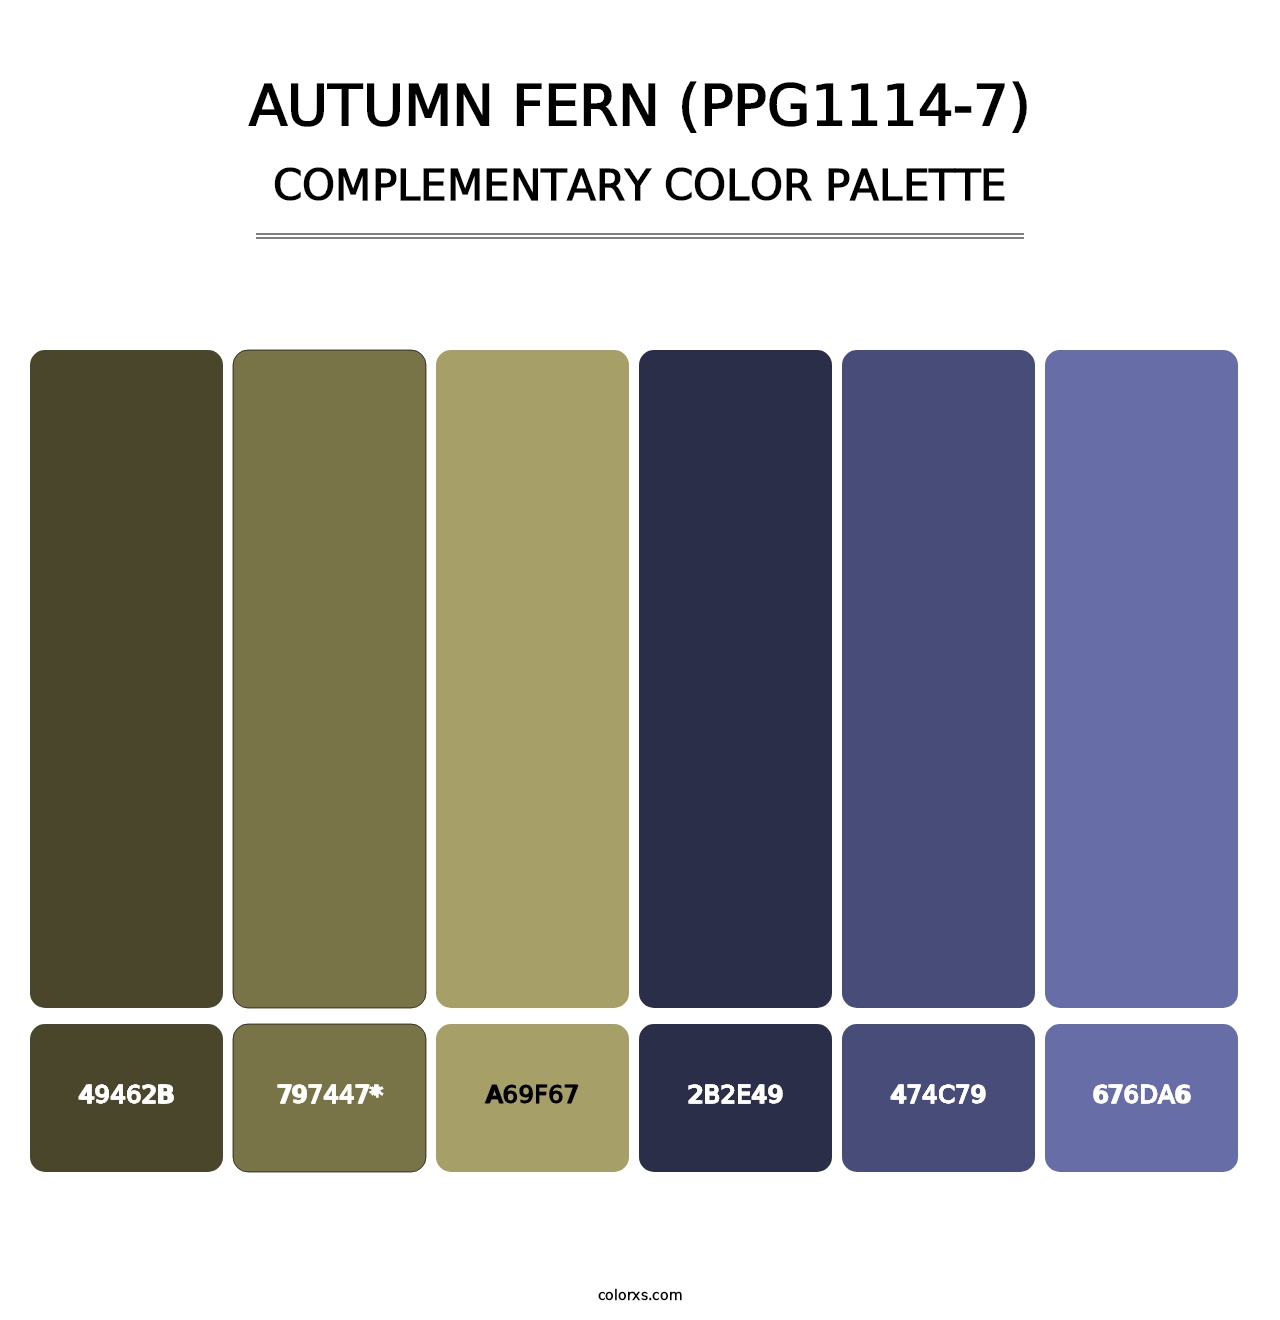 Autumn Fern (PPG1114-7) - Complementary Color Palette